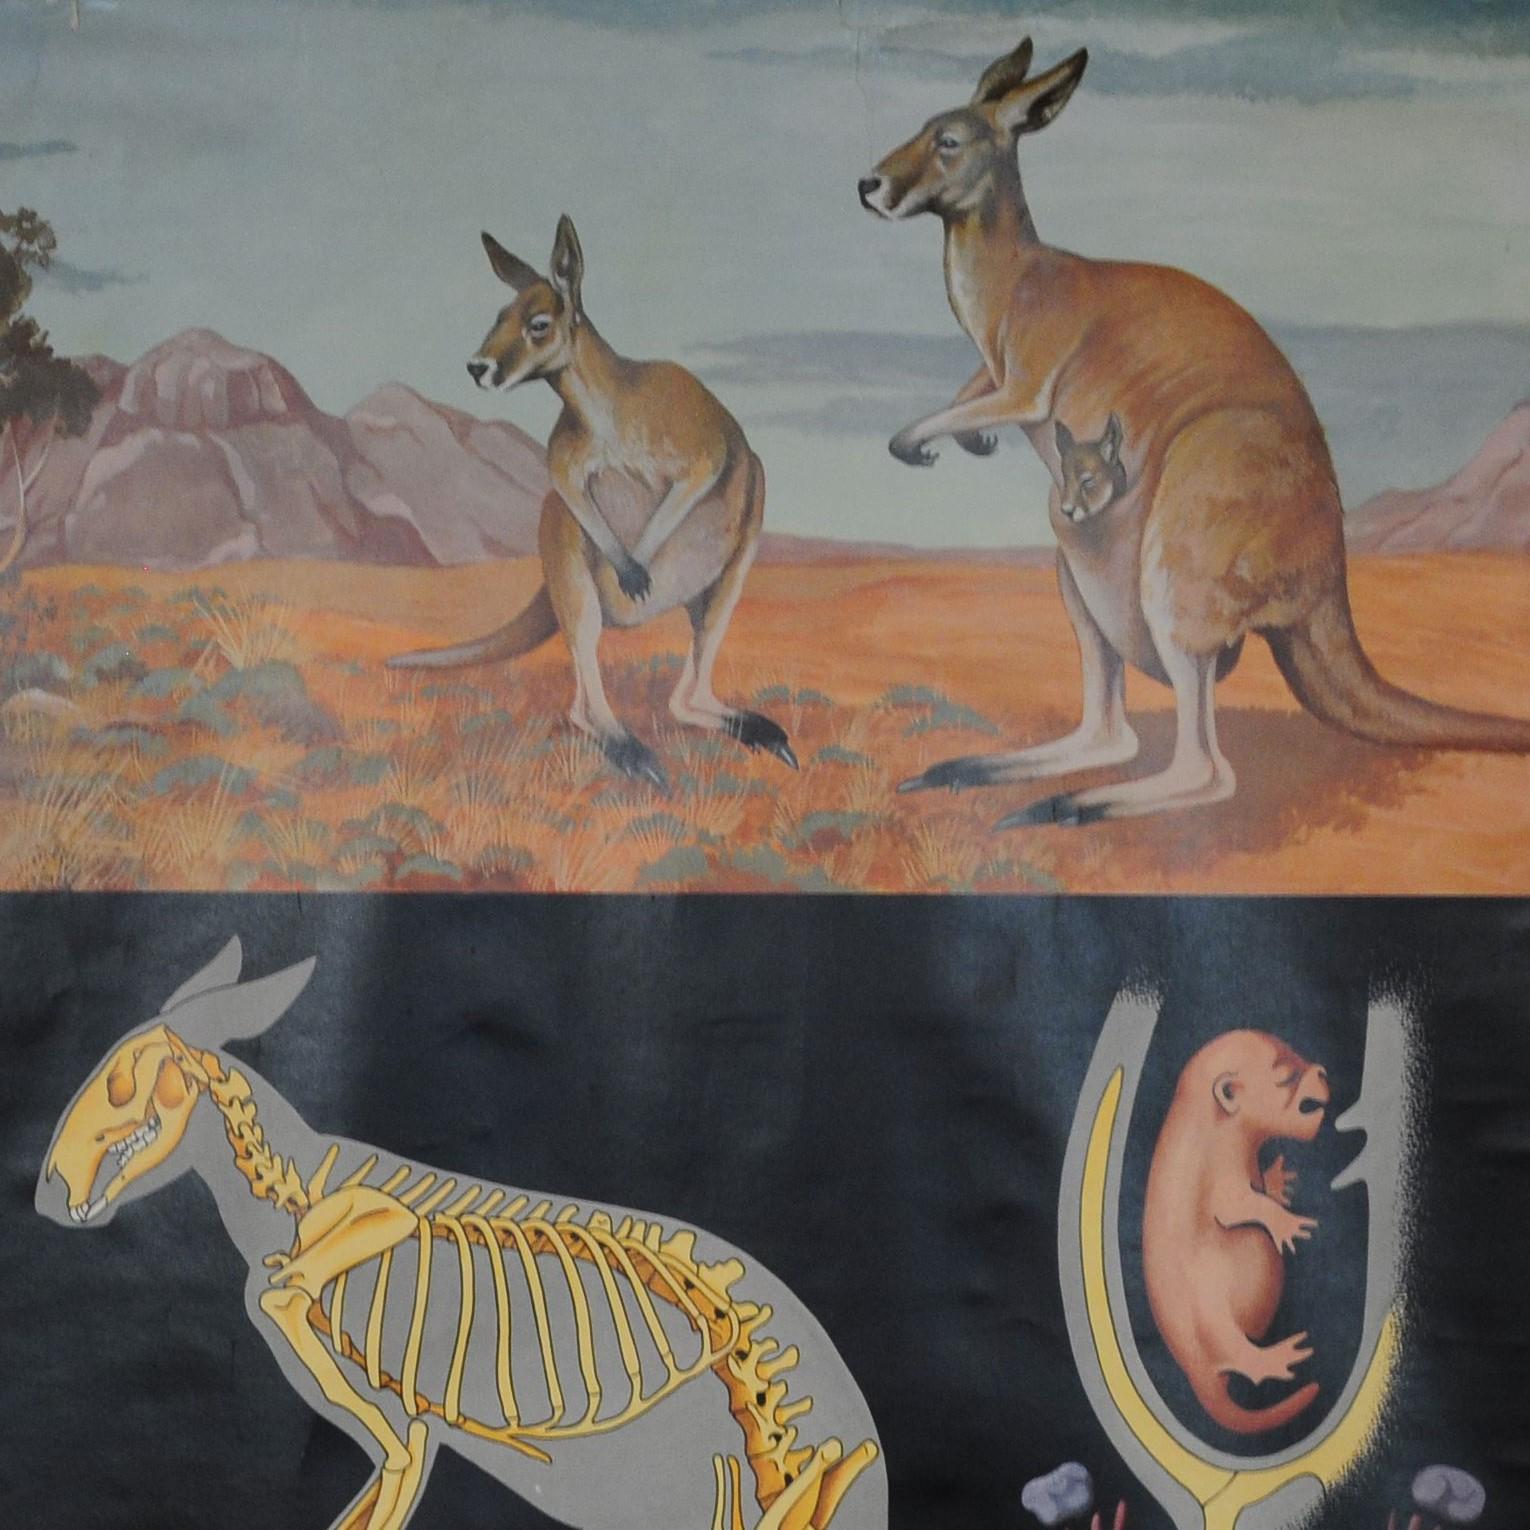 A fantastic cottagecore rollable wall chart by famous Jung Koch Quentell showing the profil of the lovely kangaroo. The chart is published by Lehrmittelverlag Hagemann, Duesseldorf. Used as teaching material in German schools circa 1970s. Colorful